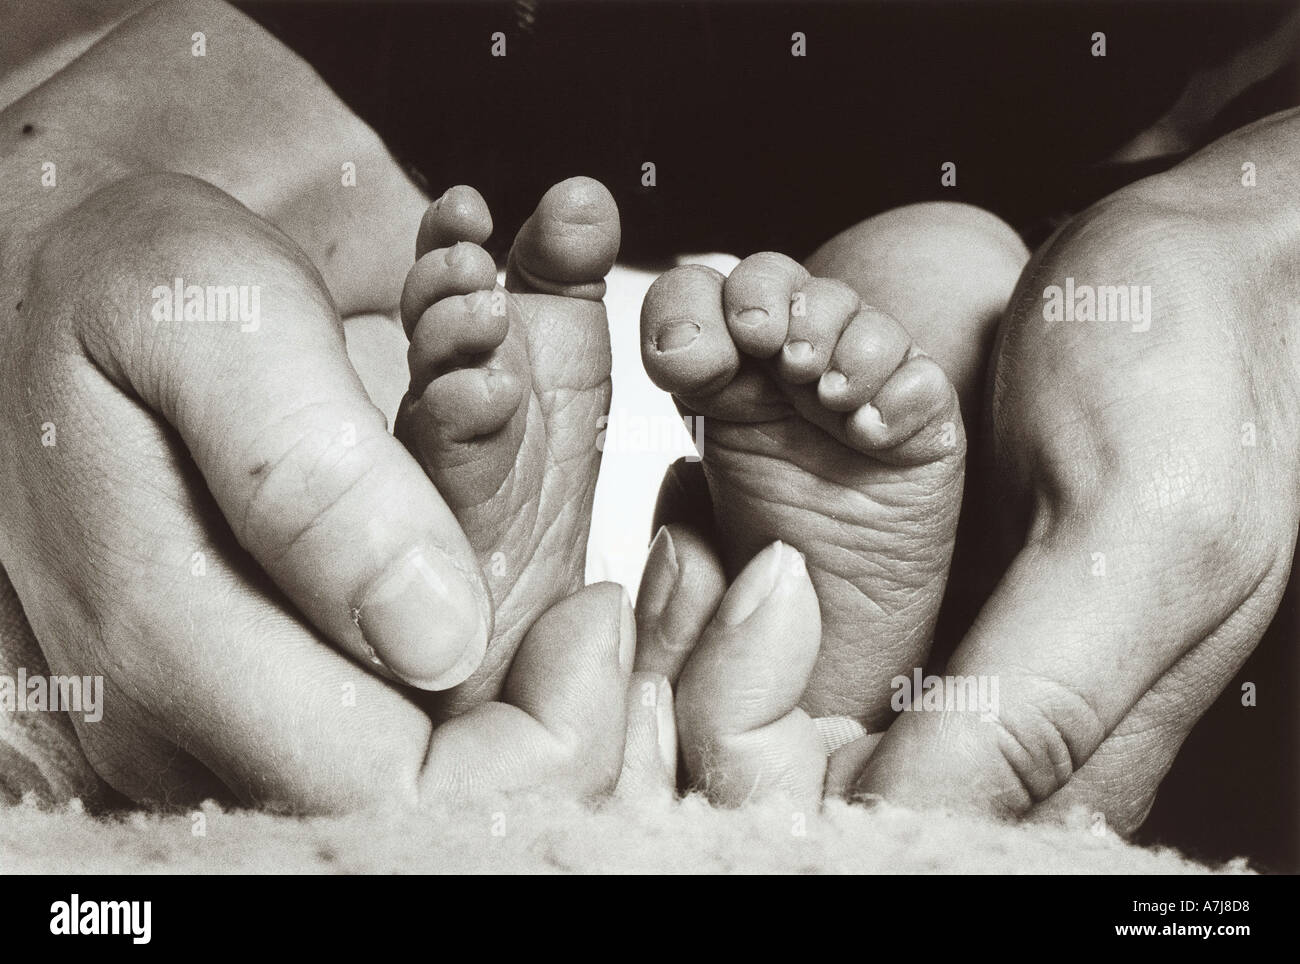 Adorable baby feet cradled in a mothers loving hands Stock Photo